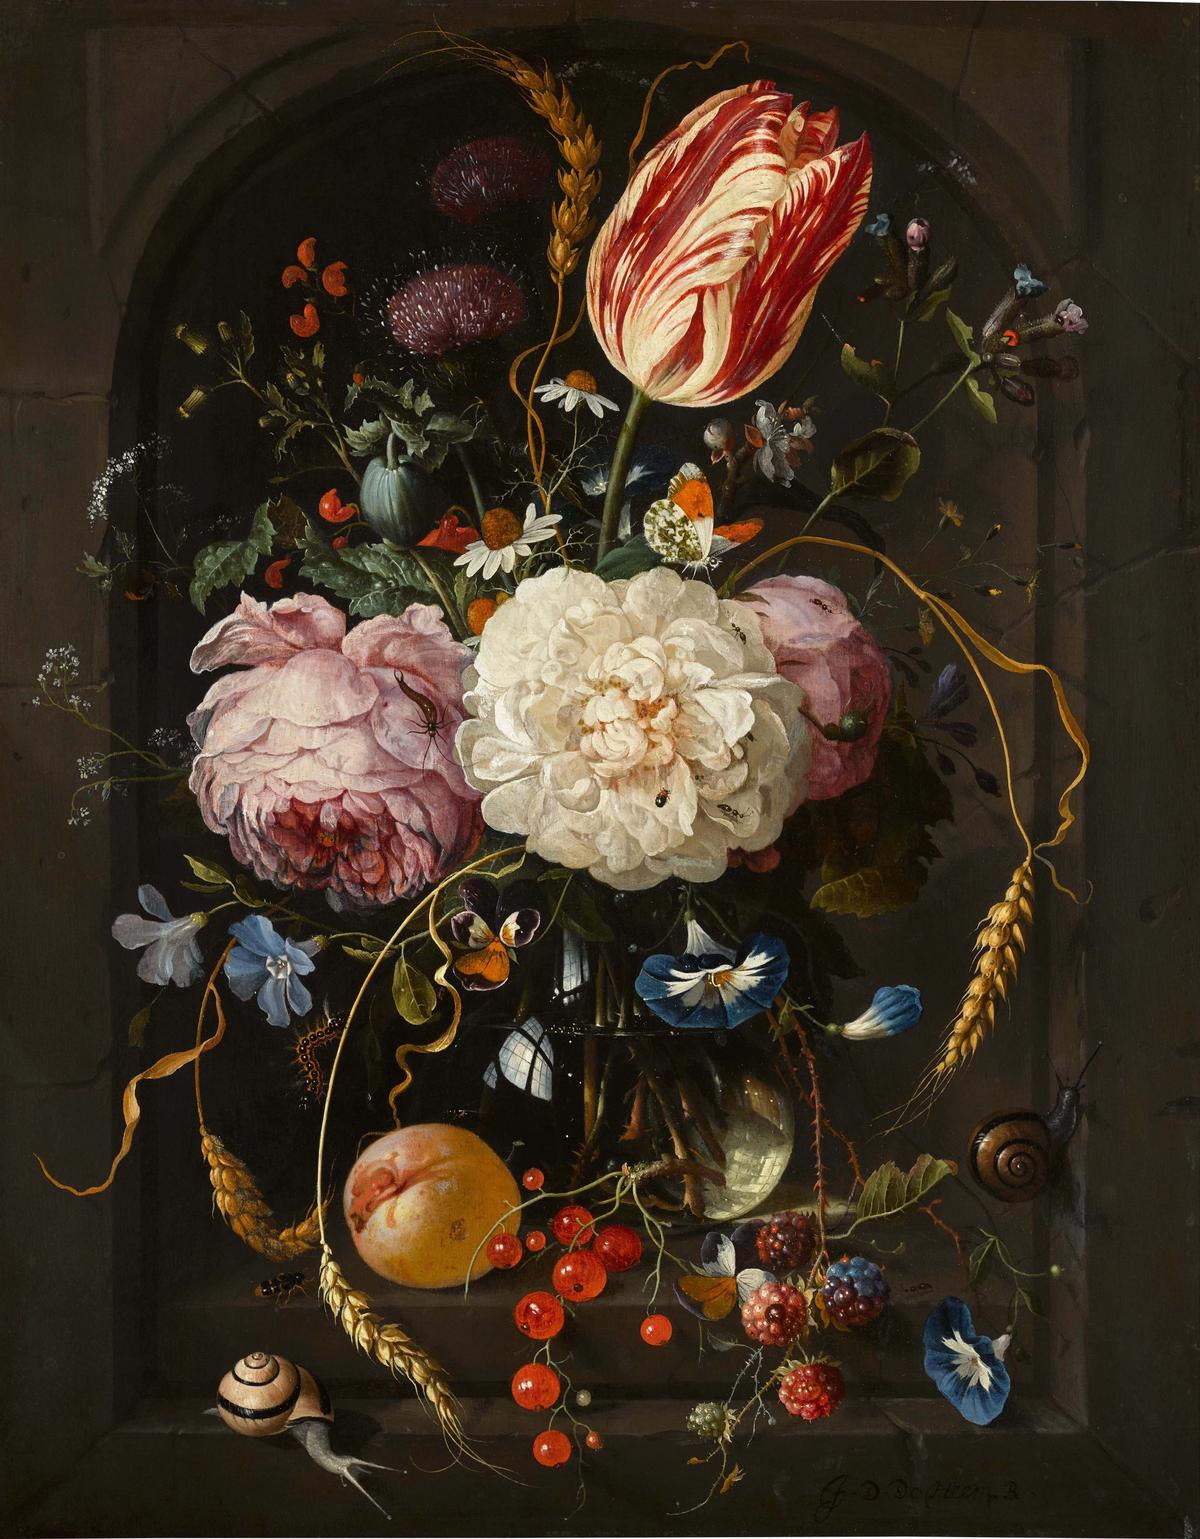 Jan Davidszoon de Heem, Still life of flowers in a glass vase in a stone niche (1660)
Courtesy of Sotheby’s